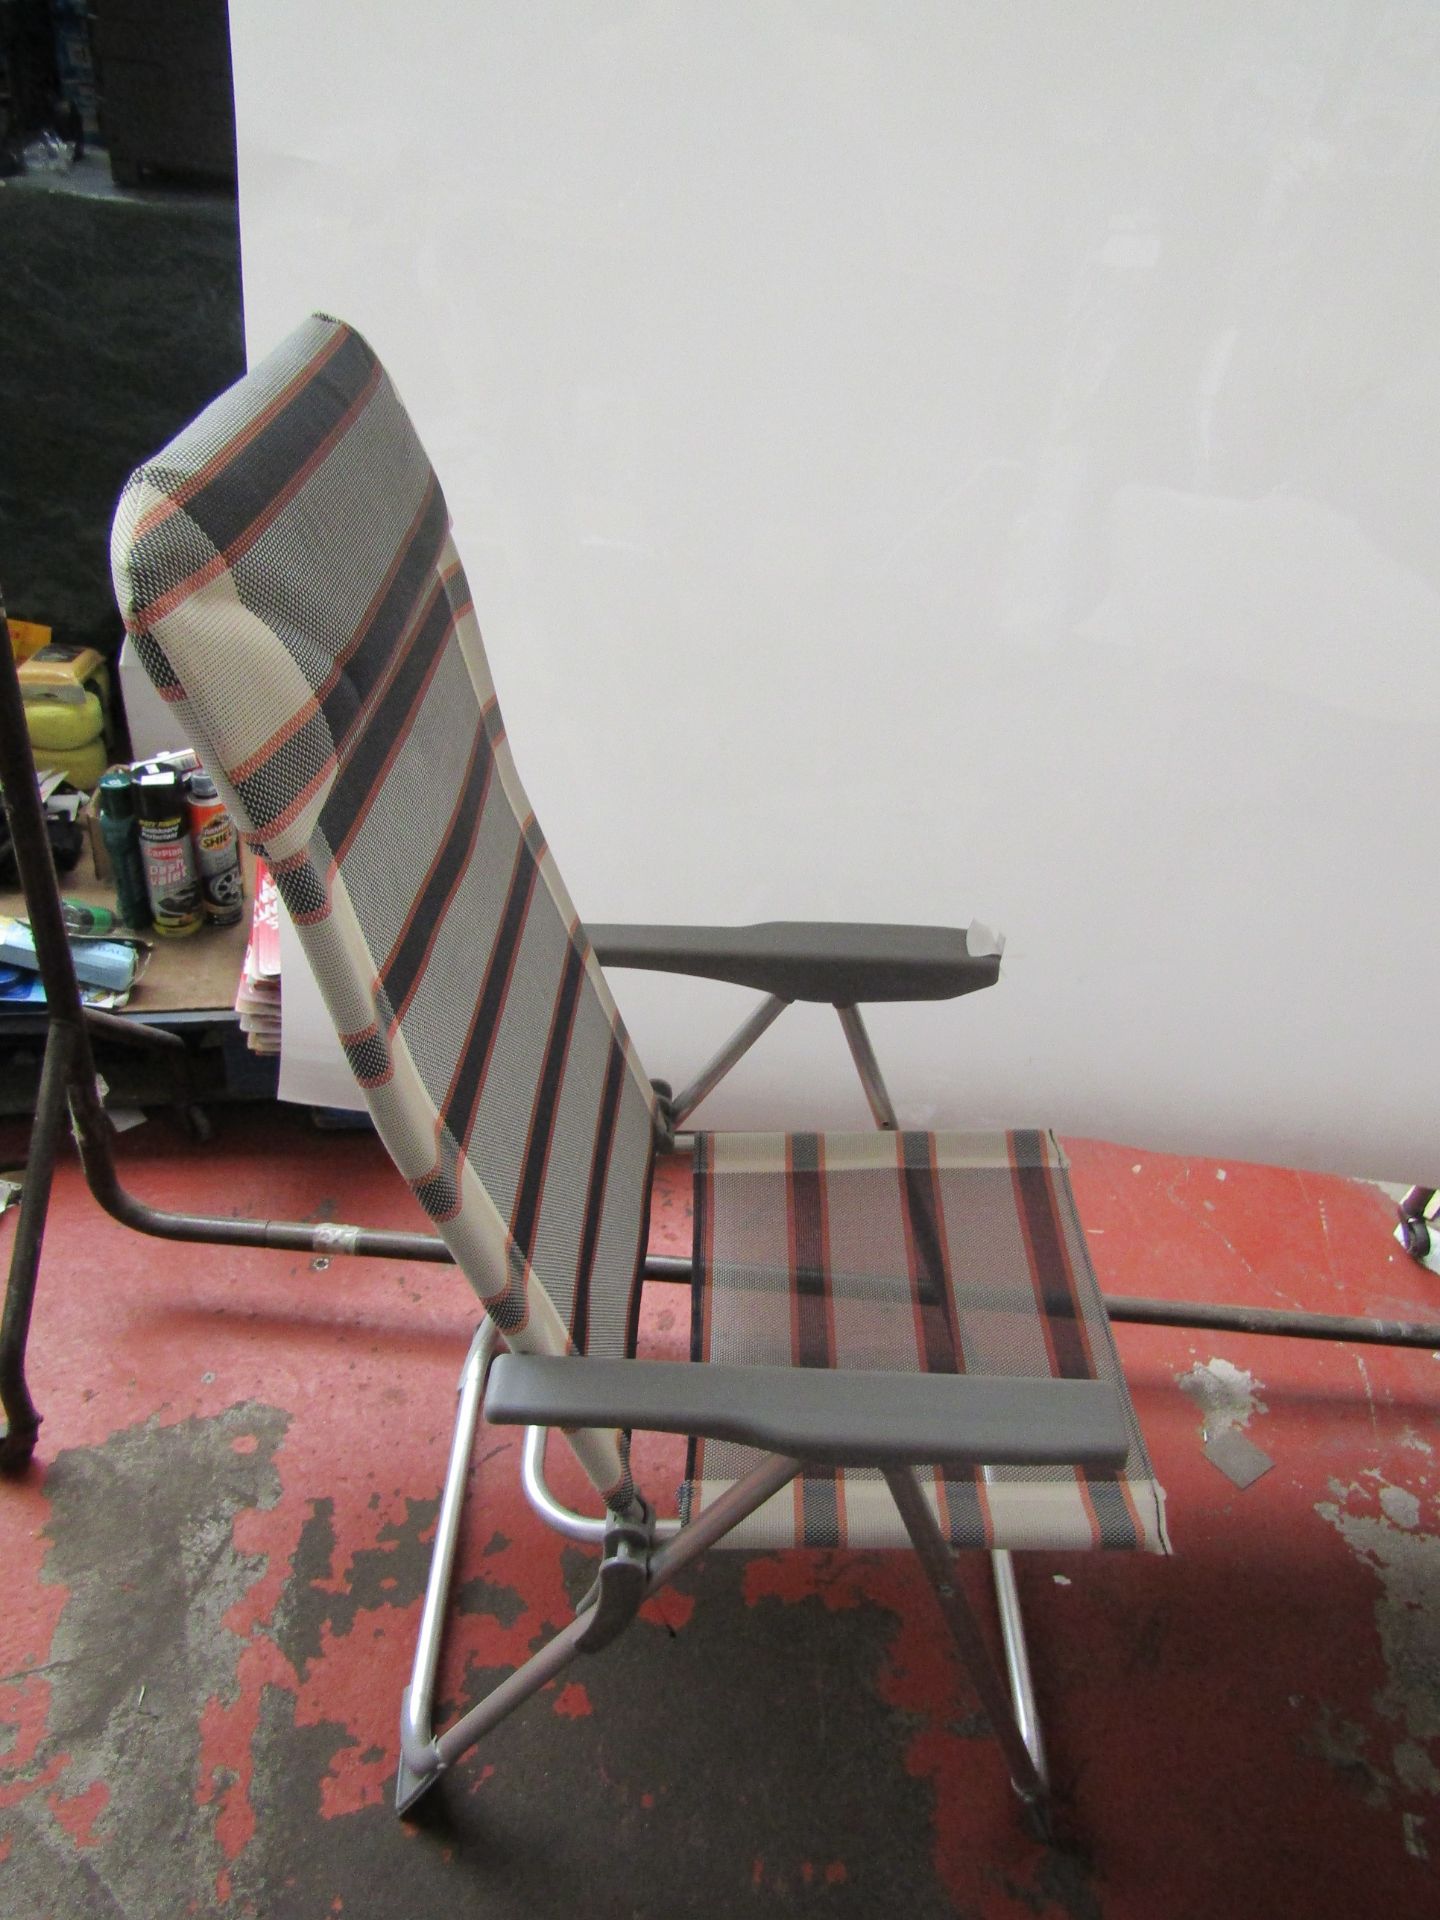 Foldable Outdoor Garden Chair, Also Reclines. Looks In Good Condition.